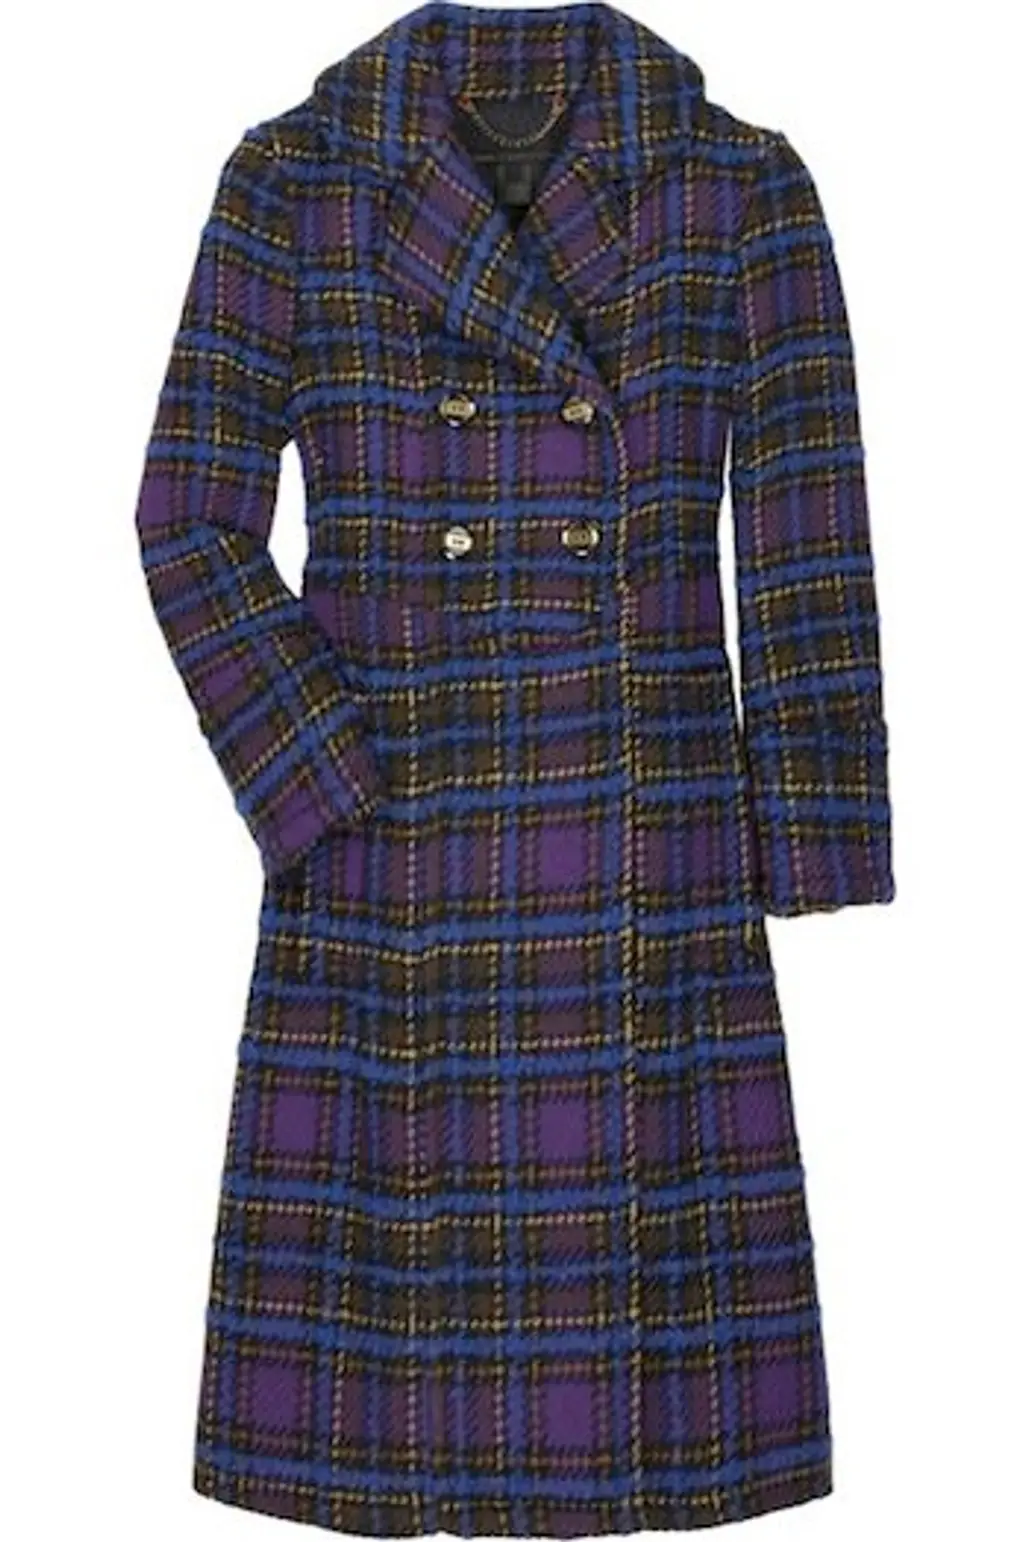 Marc by Marc Jacobs Checked Wool-Blend Long Coat